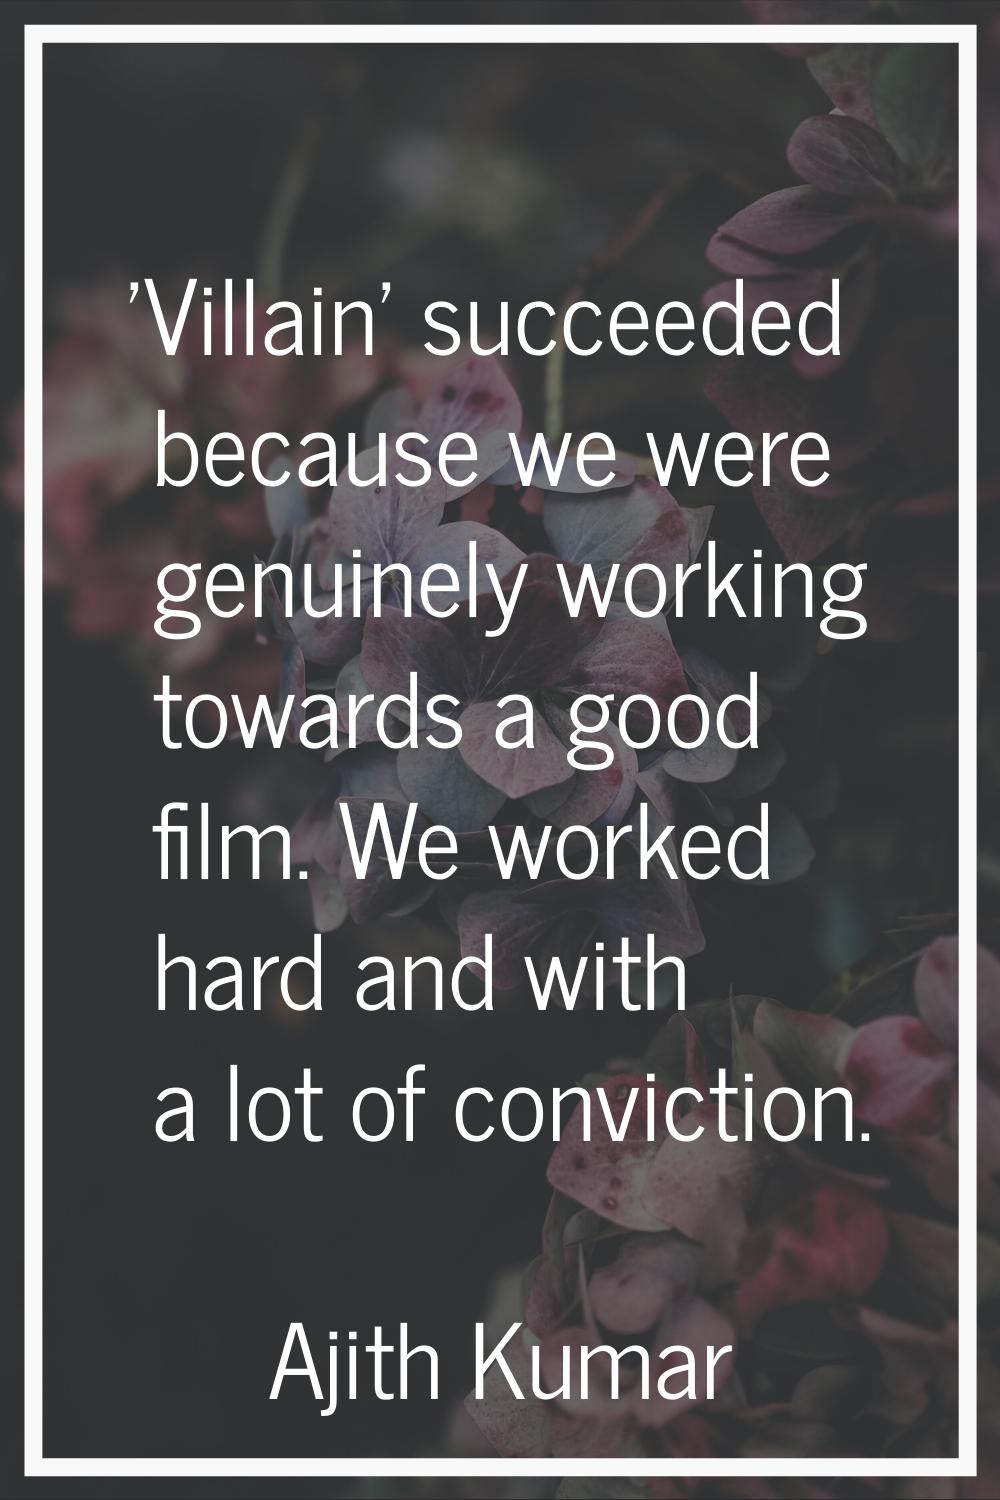 'Villain' succeeded because we were genuinely working towards a good film. We worked hard and with 